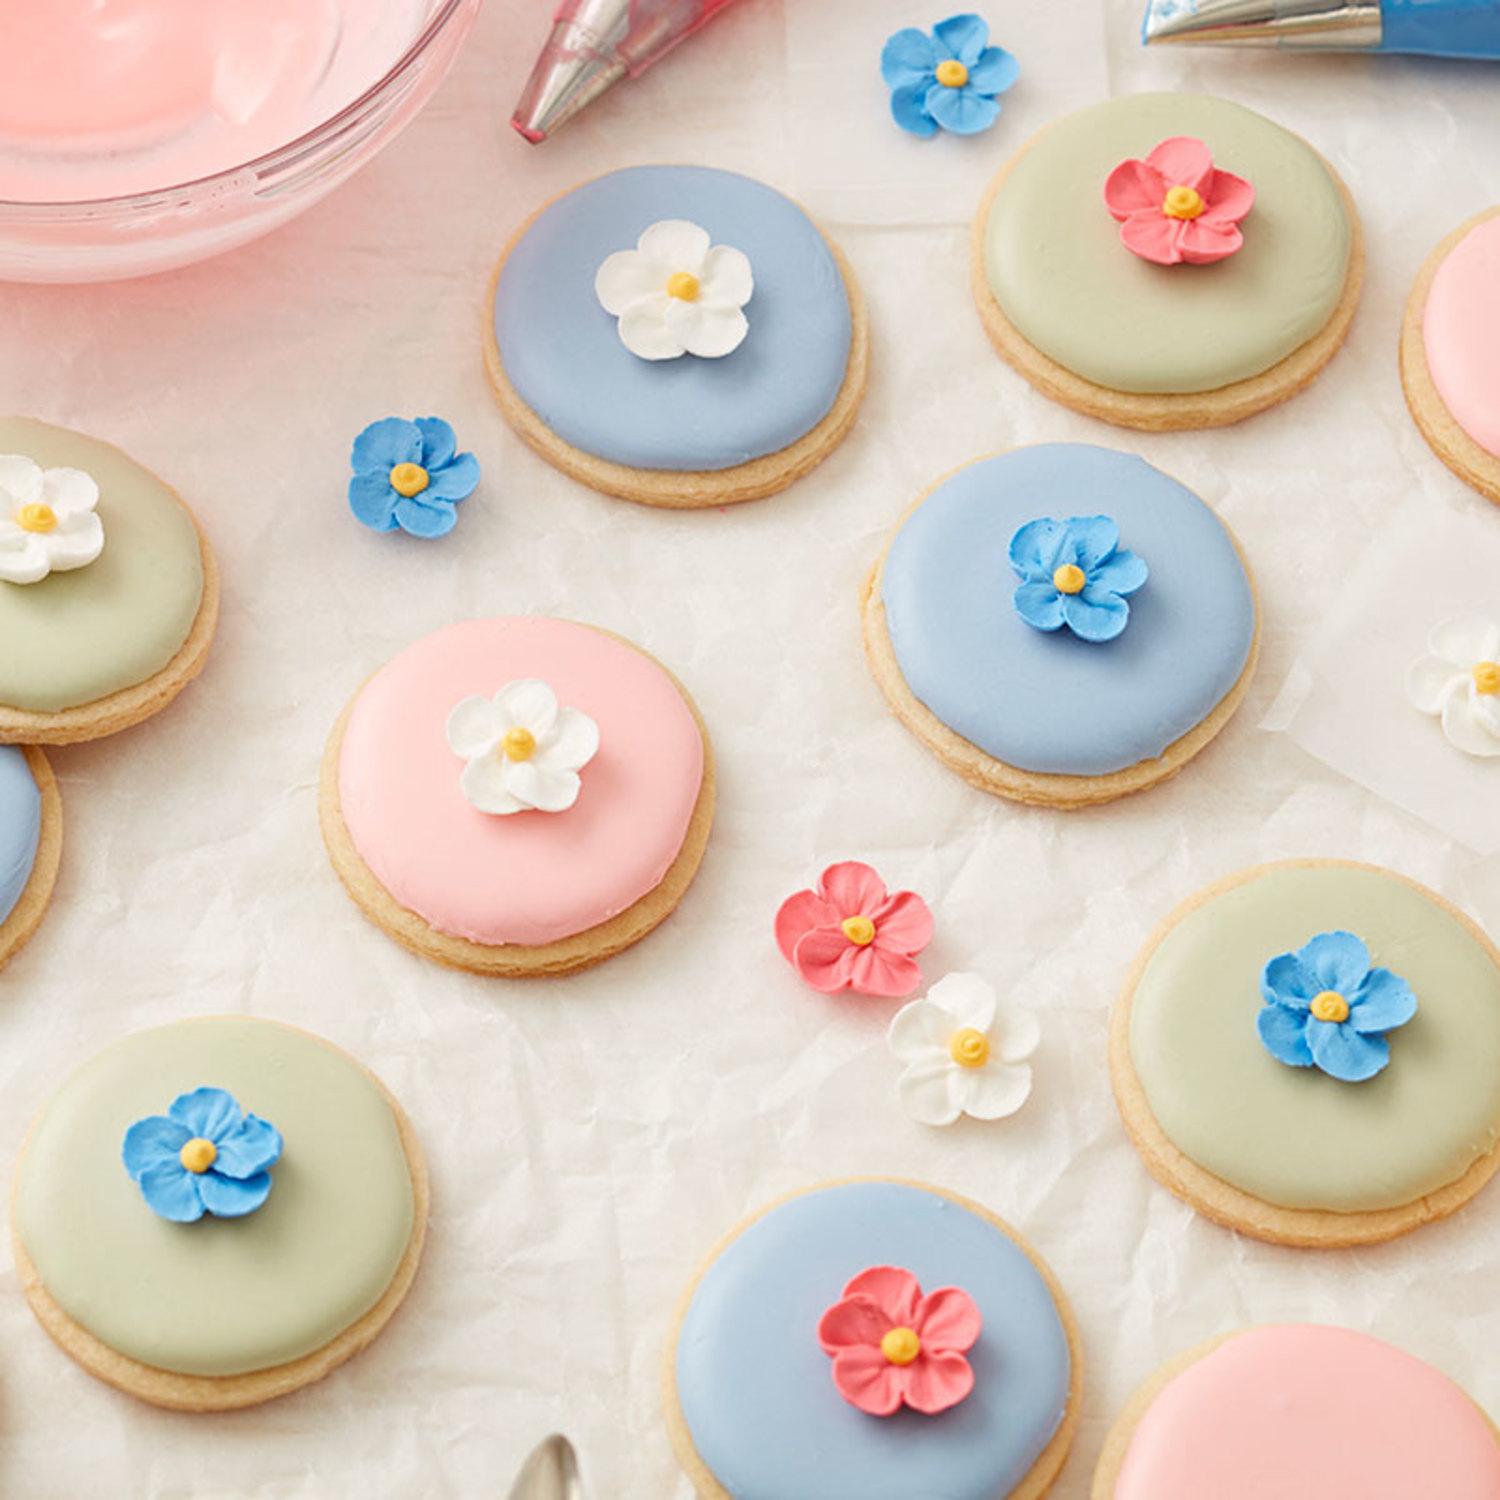 Forget-Me-Not Cookies